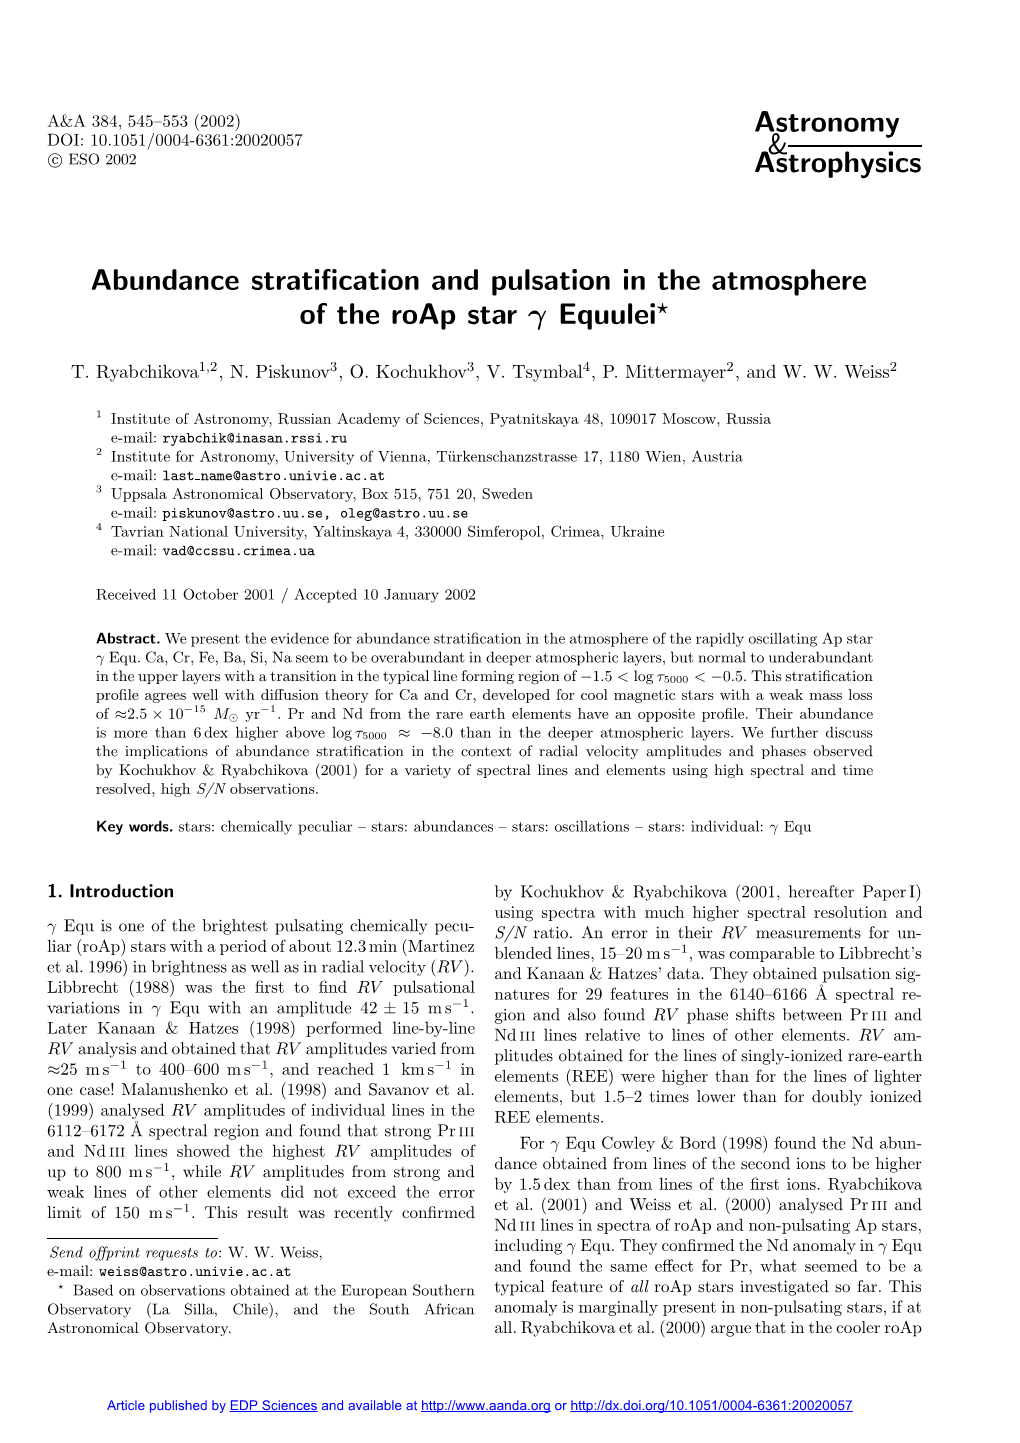 Abundance Stratification and Pulsation in the Atmosphere of the Roap Star $\Boldmath\Gamma$ Equulei